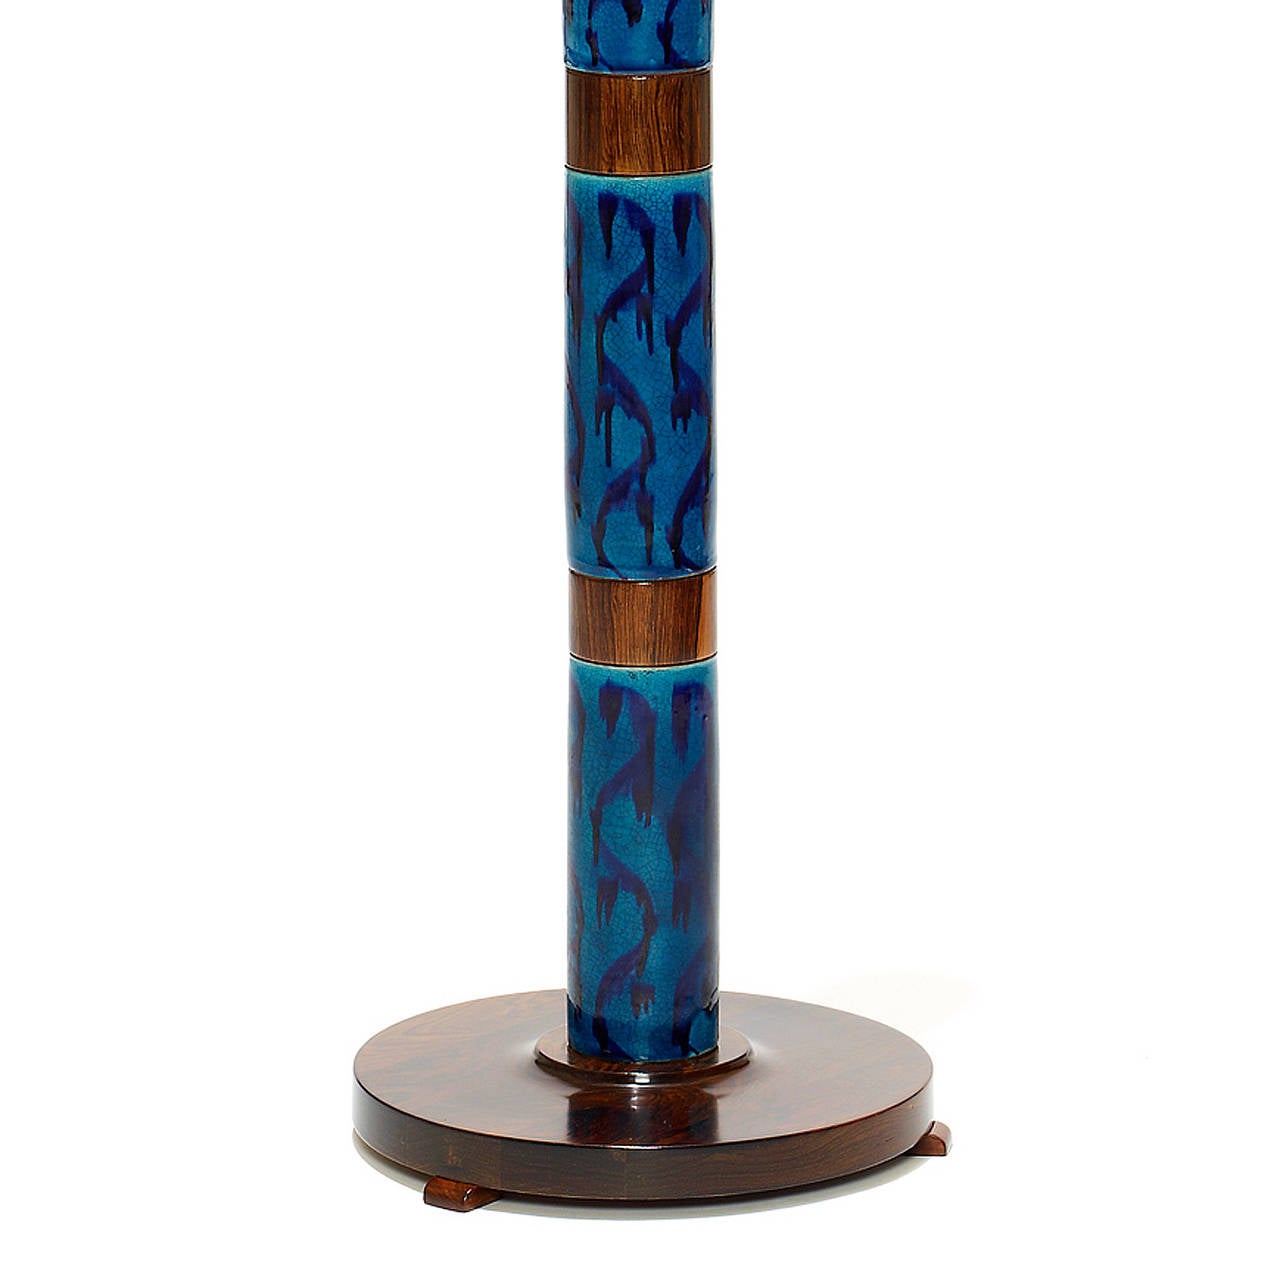 Scandinavian Modern Standing Lamp with Hand-Painted Tiles by Stig Lindberg for Gustavsberg For Sale